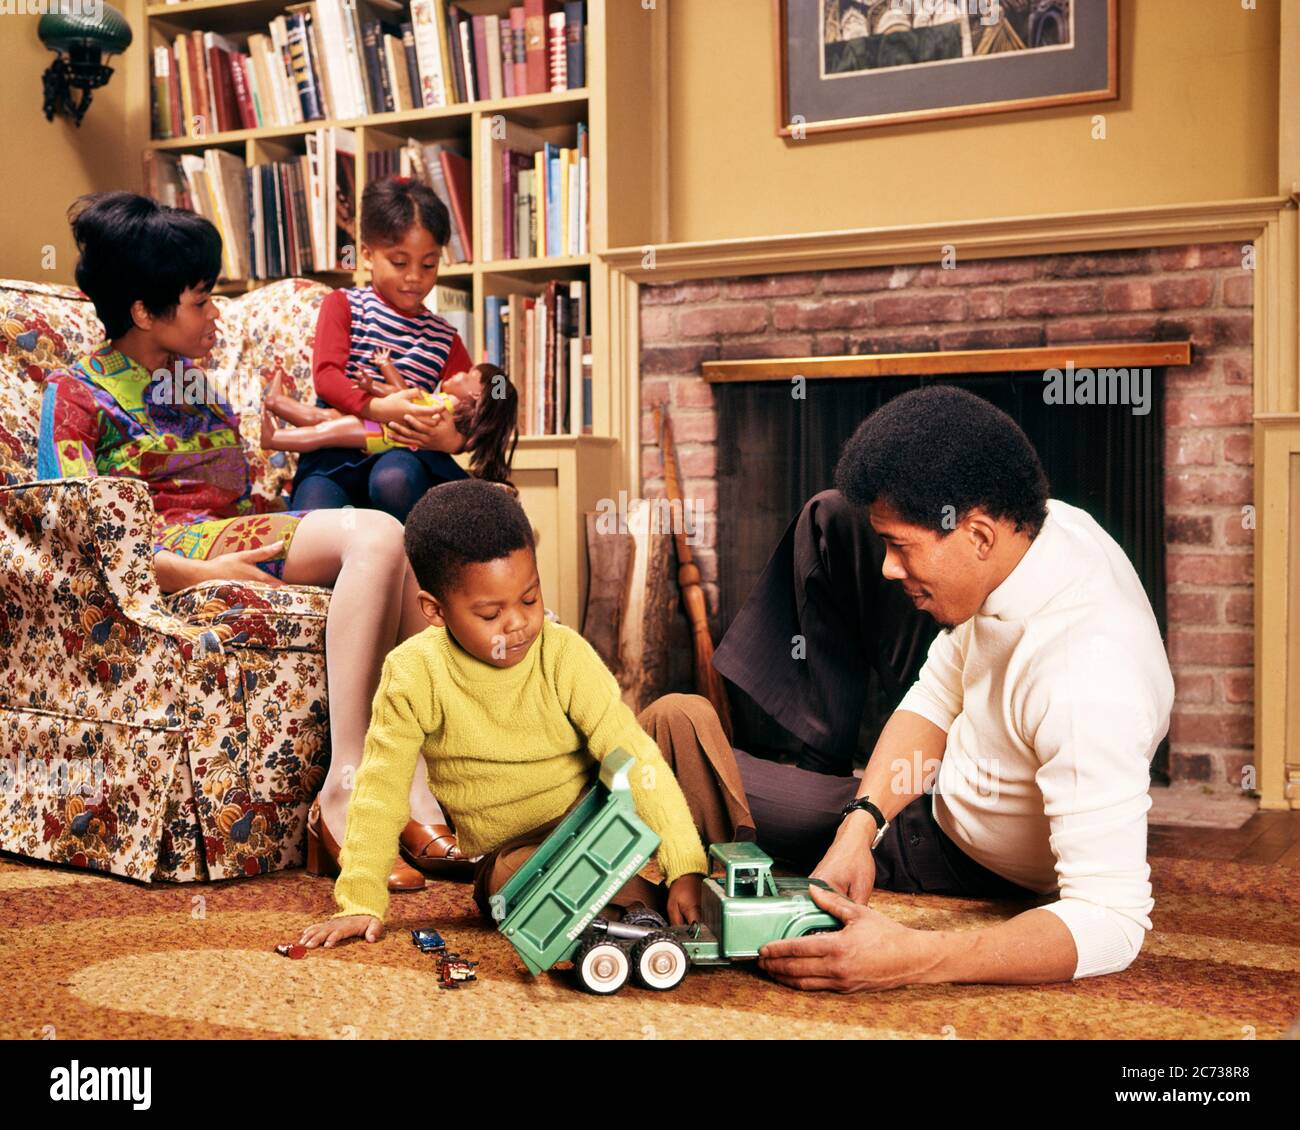 https://c8.alamy.com/comp/2C738R8/1970s-african-american-family-in-living-room-man-and-boy-on-floor-with-truck-woman-and-girl-on-chair-with-doll-kj5144-pht001-hars-four-furniture-mom-indoors-floor-ethnic-nostalgic-4-suburban-urban-color-relationship-mothers-old-time-nostalgia-brother-chairs-old-fashion-sister-juvenile-vehicle-families-joy-lifestyle-satisfaction-parenting-females-brothers-relation-husbands-grownup-home-life-transport-copy-space-people-children-friendship-half-length-persons-inspiration-grown-up-males-siblings-americans-sisters-transportation-fathers-husband-and-wife-men-and-women-husbands-and-wives-homemaker-2C738R8.jpg